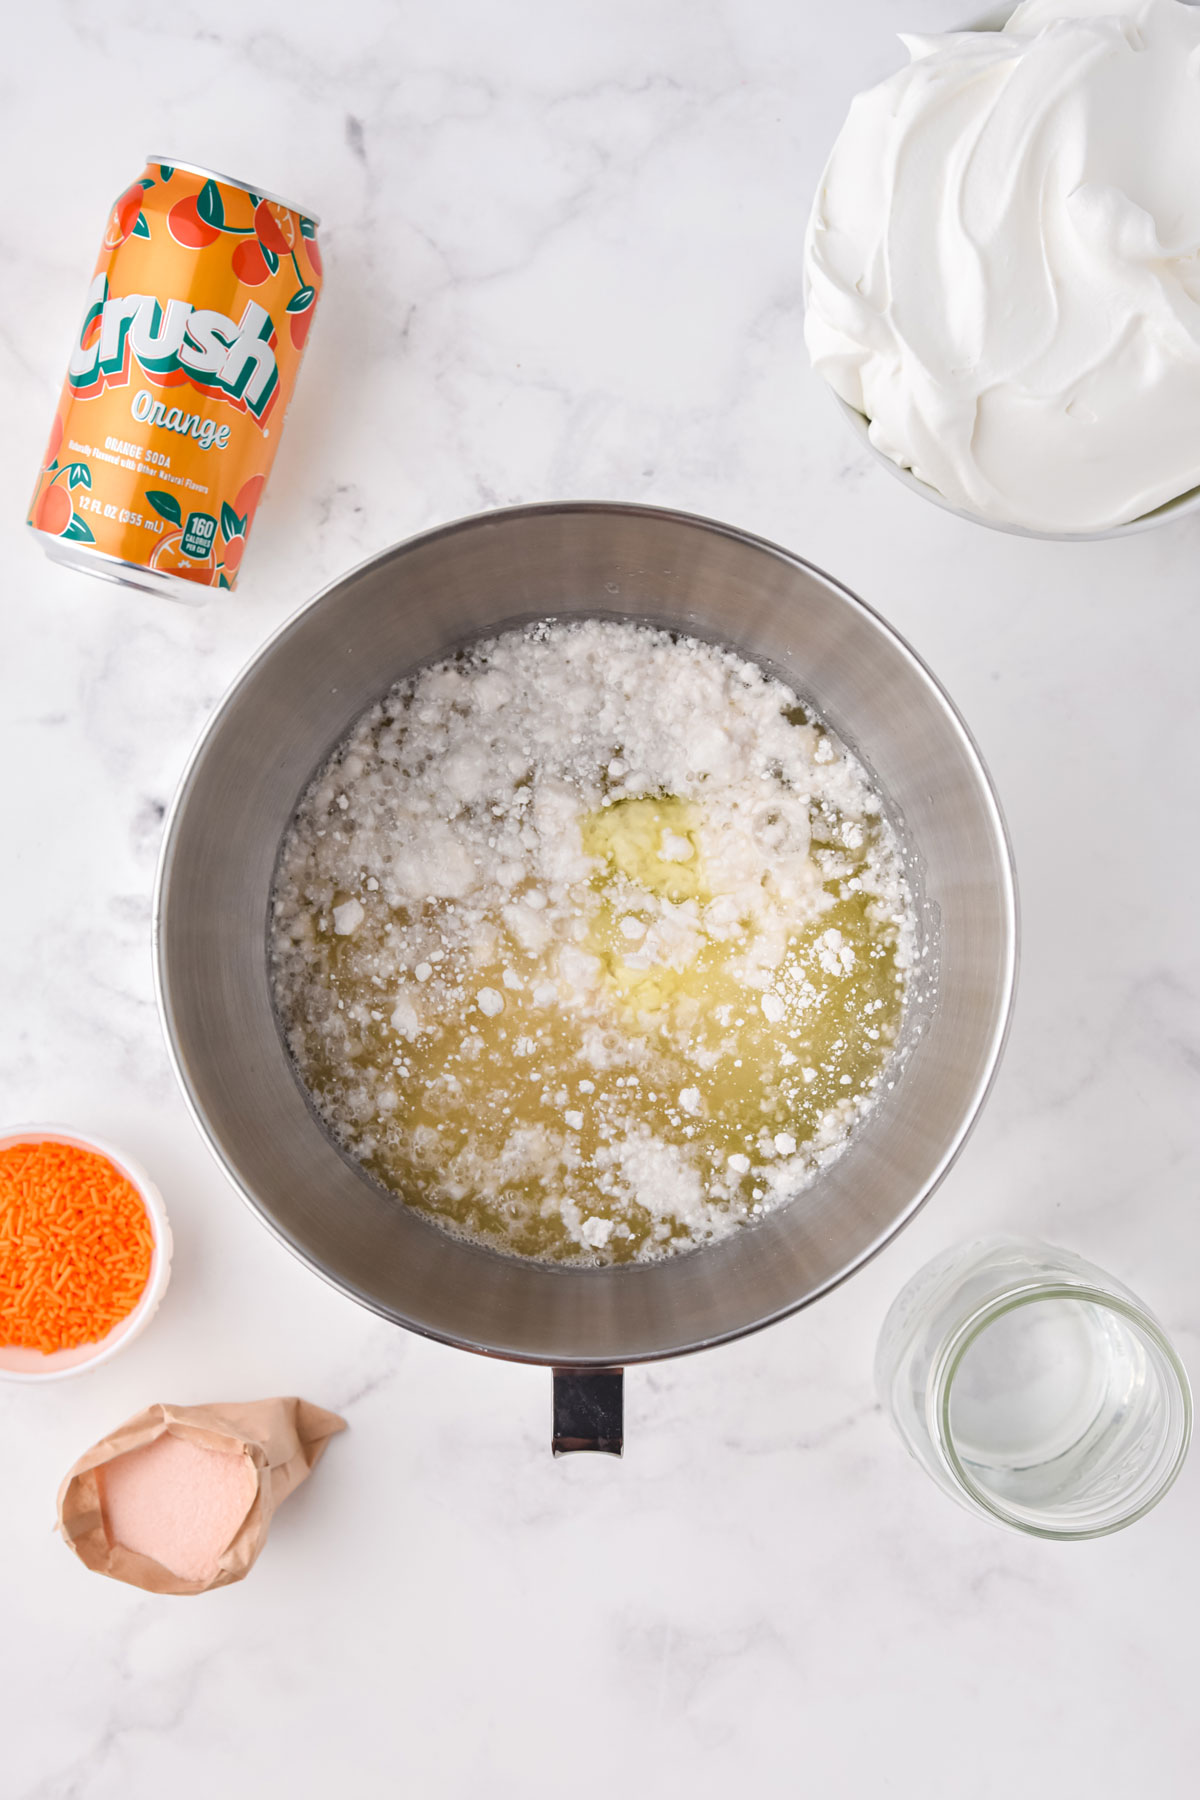 Proces of making an Orange Crush Poke Cake is to prepare the cake batter by mixing the cake mix, oil, egg whites and water.